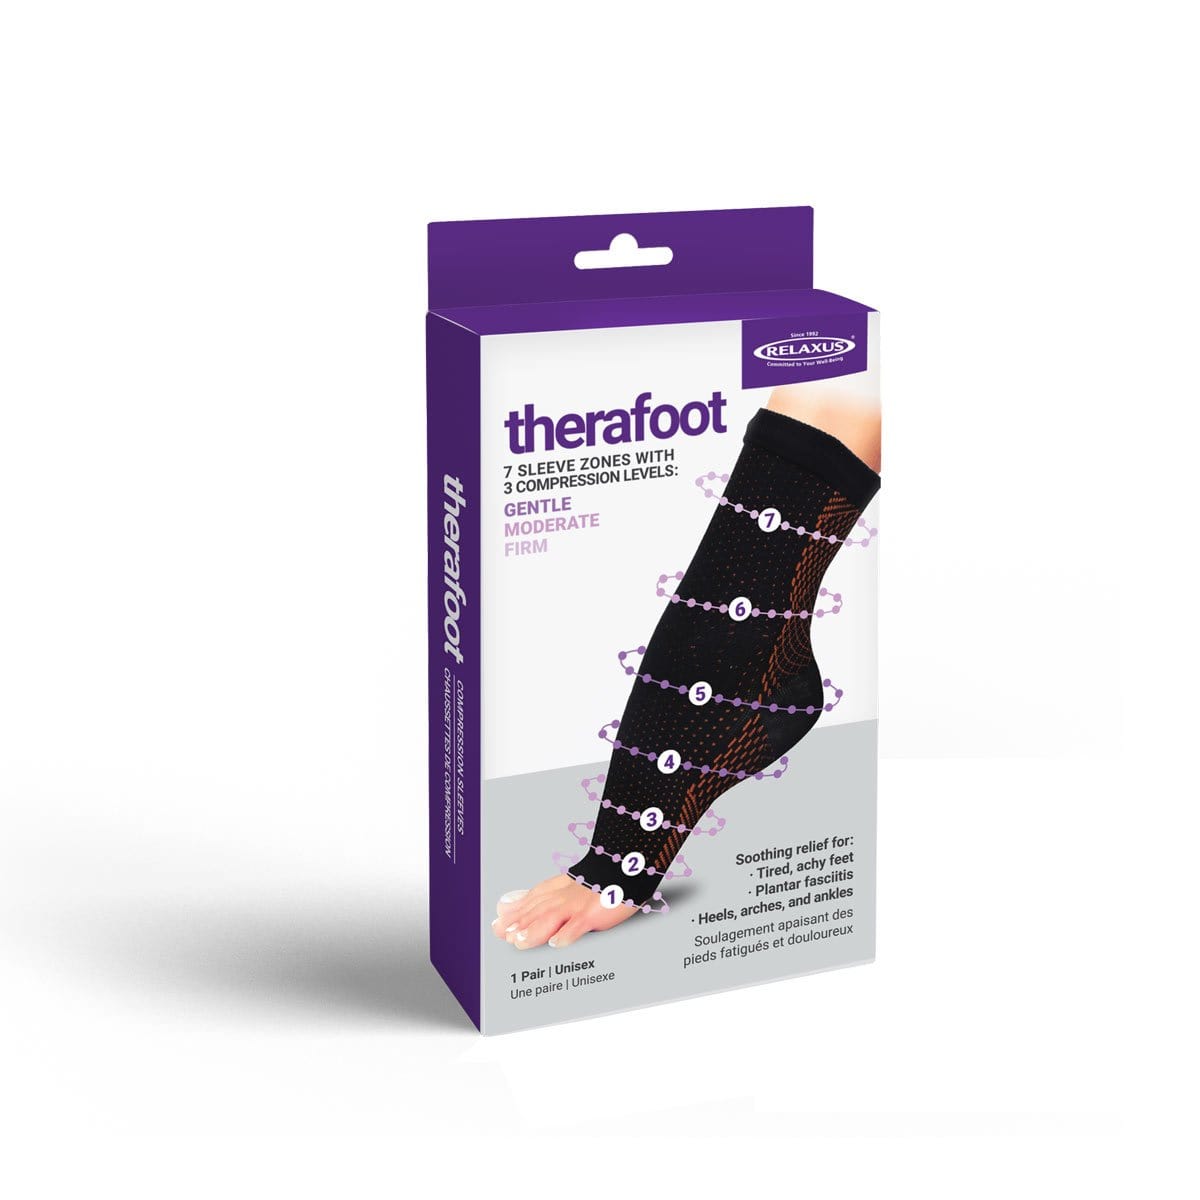 Therafoot Hemp Compression Foot Sleeves – Relaxus Professional